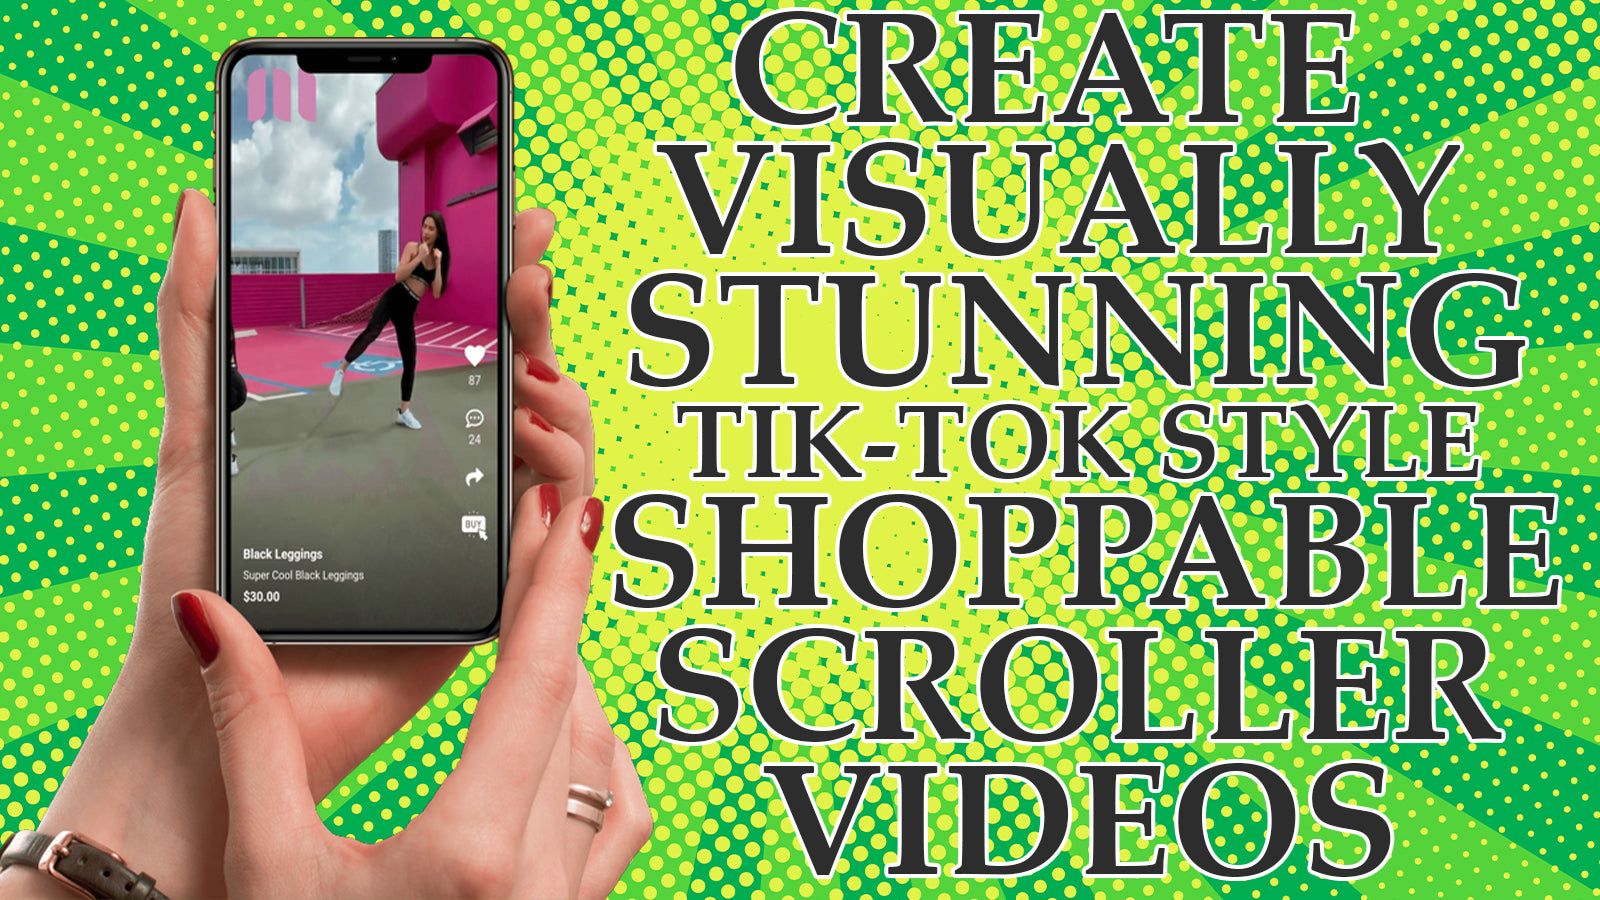 Our app is easy to use to turn your products into amazing videos